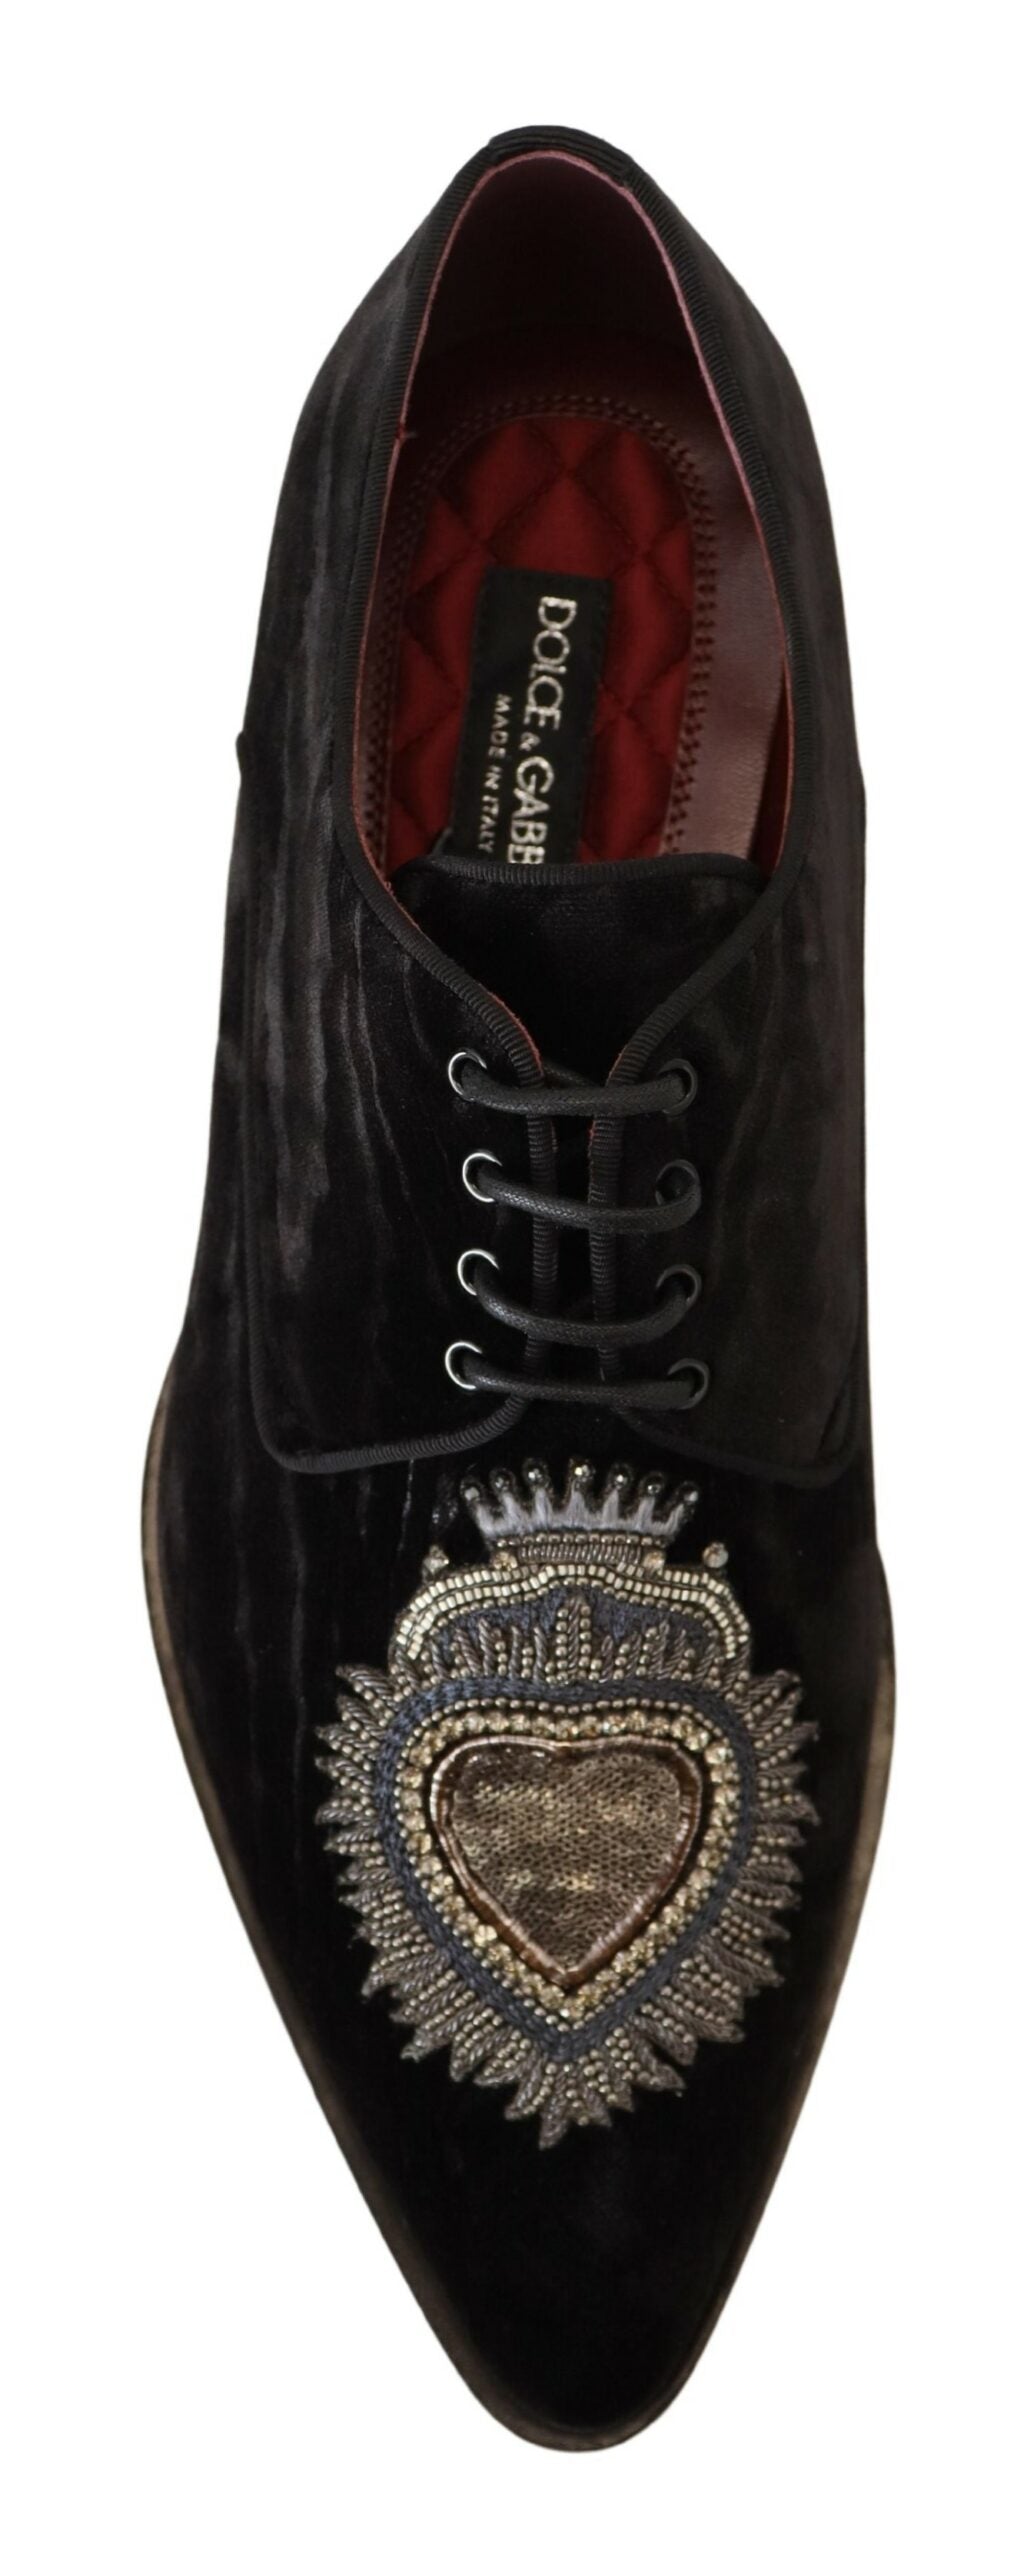 Elegant Black Derby Shoes with Heart Embroidery